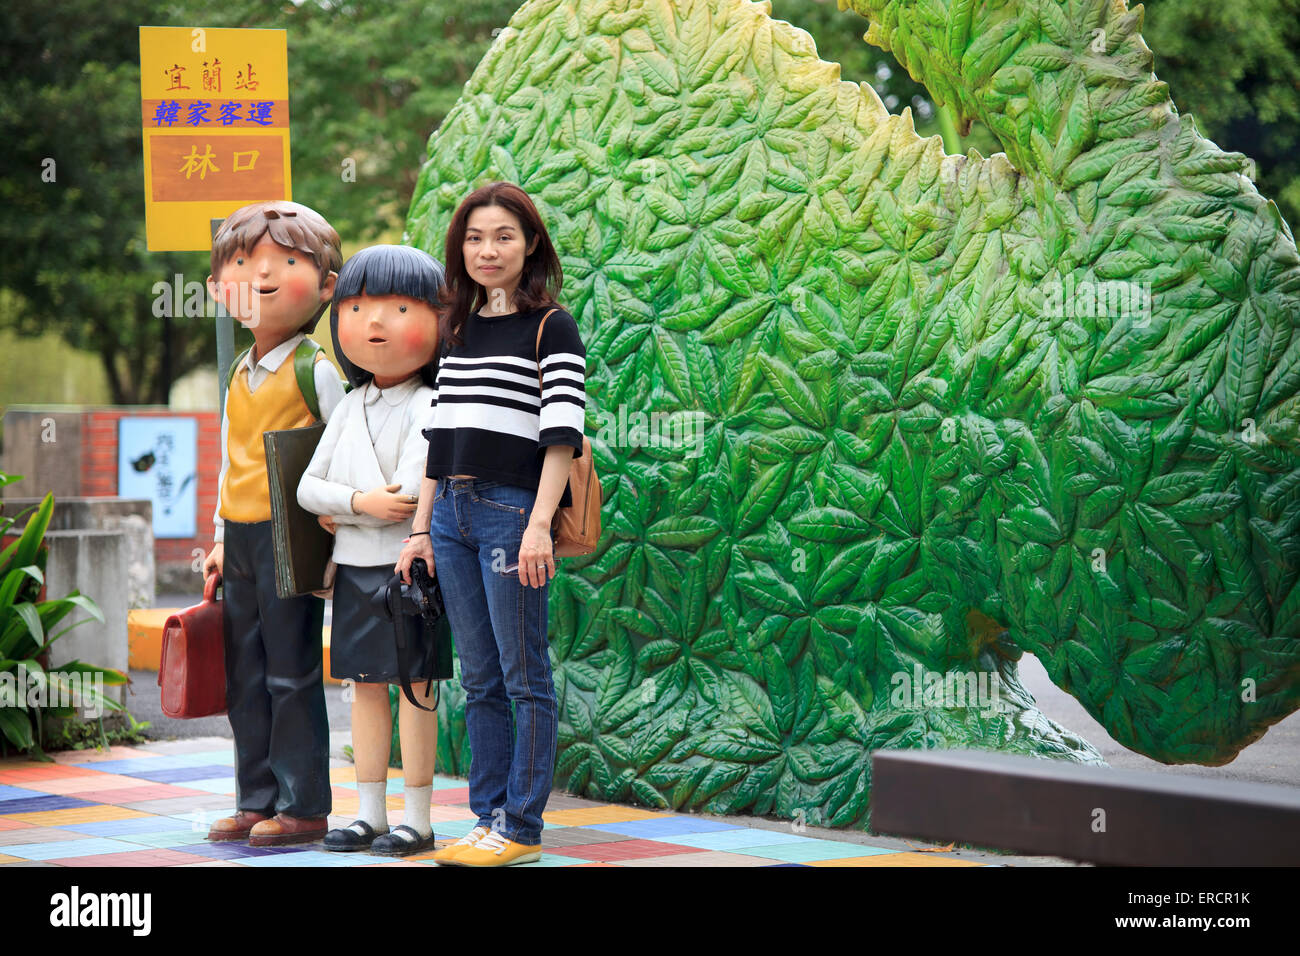 Ilan County, Taiwan - June 01, 2015: Jimmy Laio Square is a famous place with Jimmy's painting style it close to ilan tarin stat Stock Photo